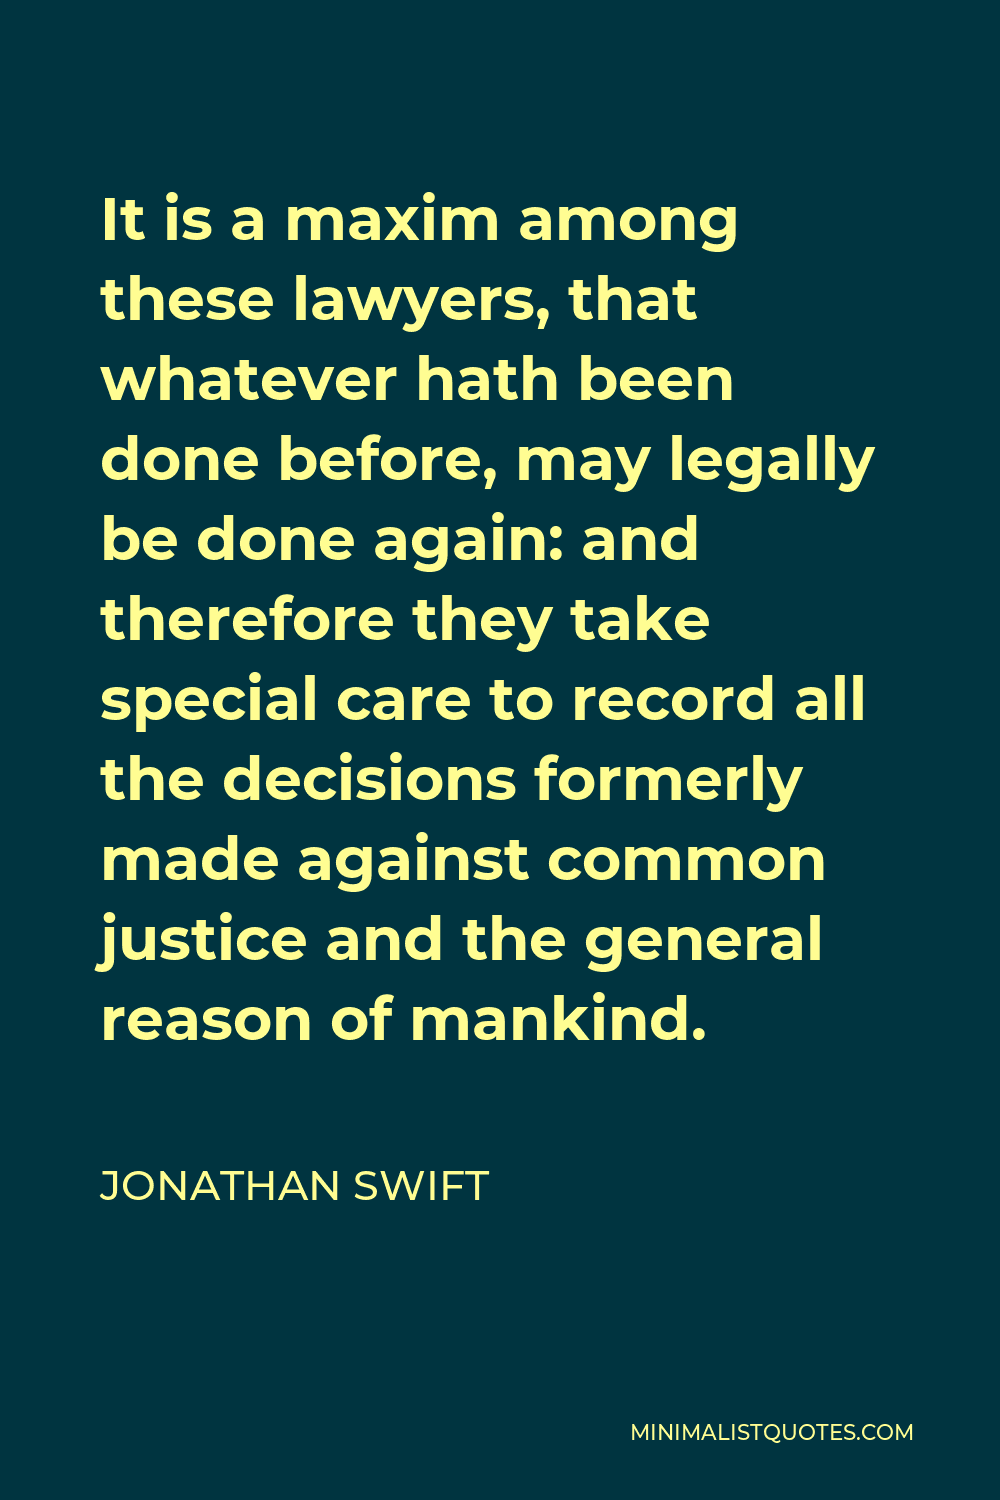 Jonathan Swift Quote - It is a maxim among these lawyers, that whatever hath been done before, may legally be done again: and therefore they take special care to record all the decisions formerly made against common justice and the general reason of mankind.